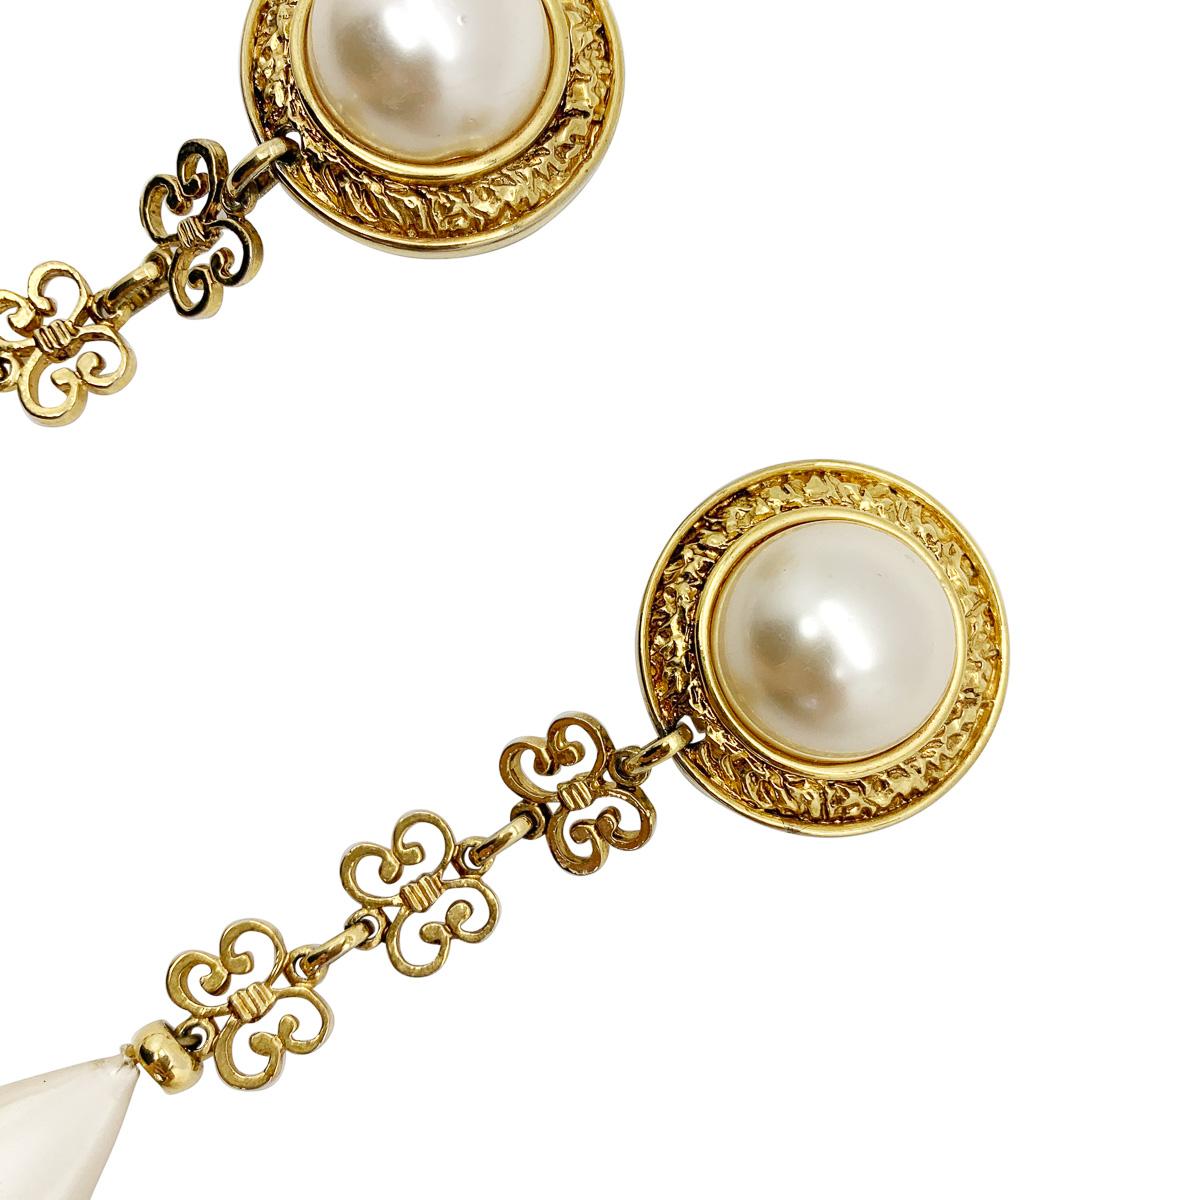 A pair of vintage pearl bomb earrings.

Vintage Condition: Very good without damage or noteworthy wear.
Materials: gold plated metal, simulated pearls
Fastening: clip on
Approximate Dimensions: 11cm
A wonderfully stylish classic statement clip.